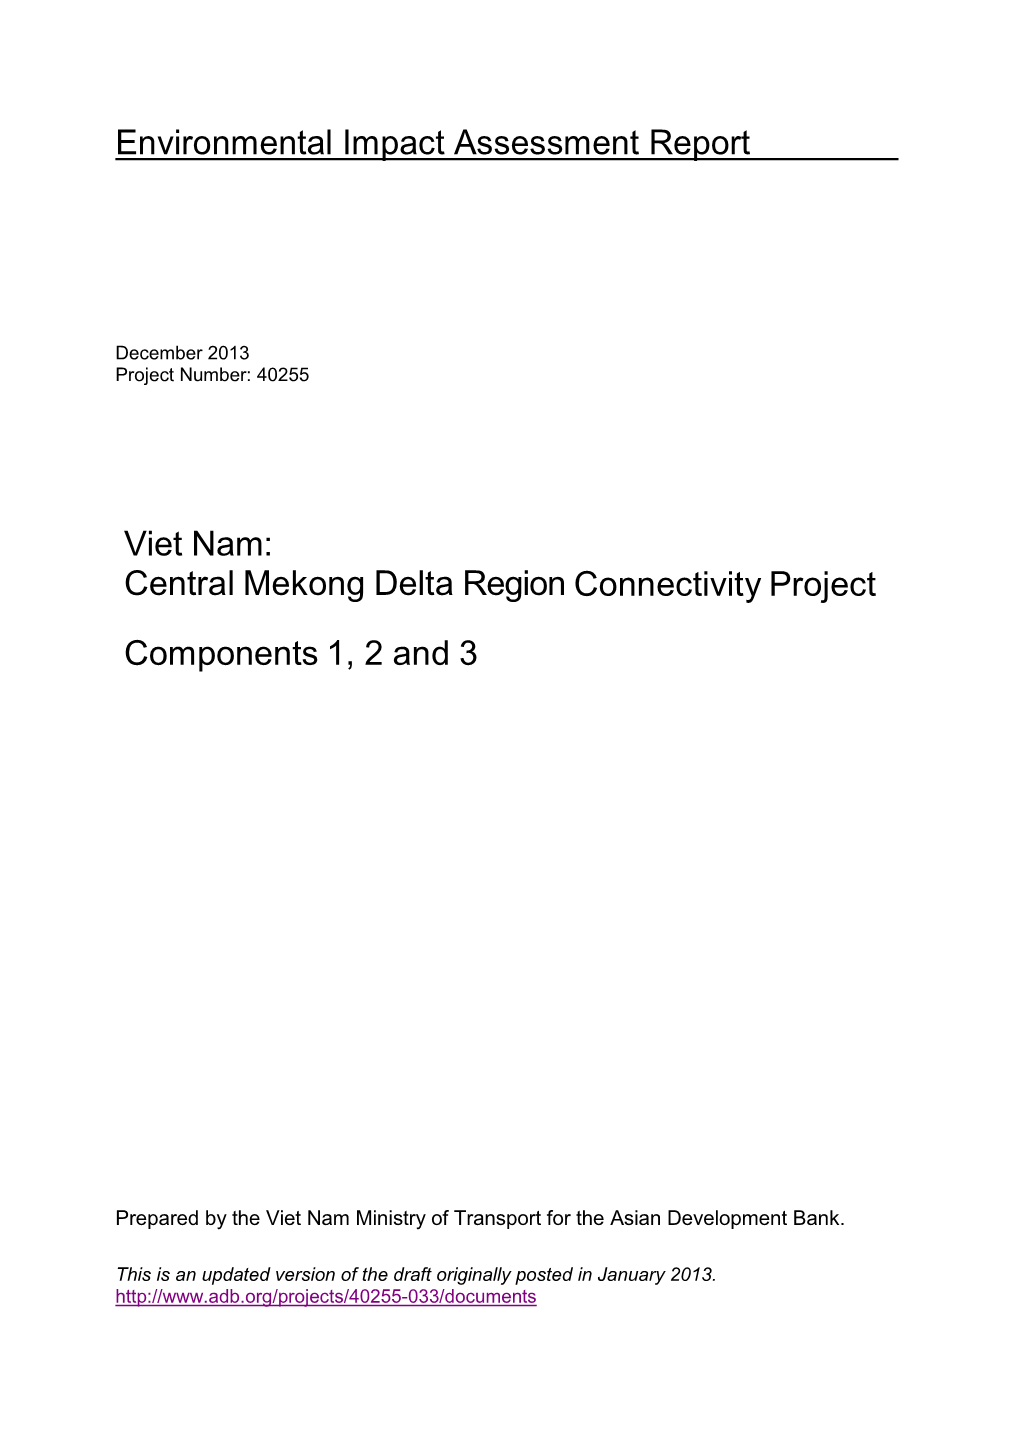 40255-033: Central Mekong Delta Region Connectivity Project